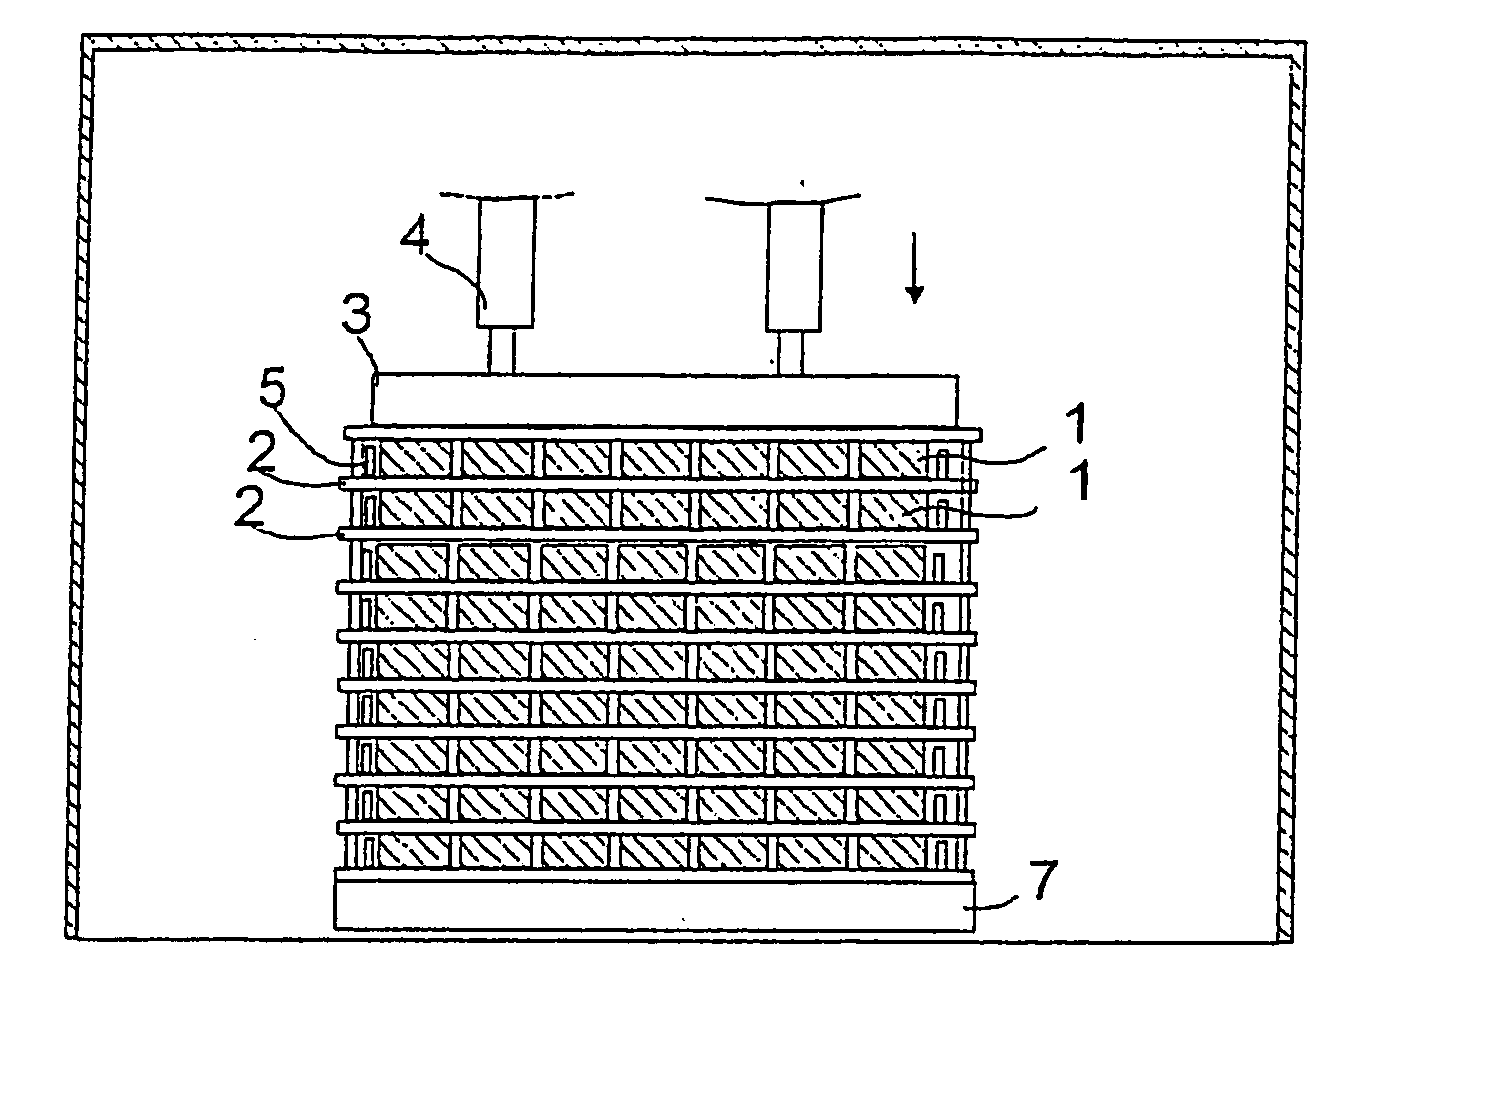 Method and apparatus for the treatment of wood or wood products